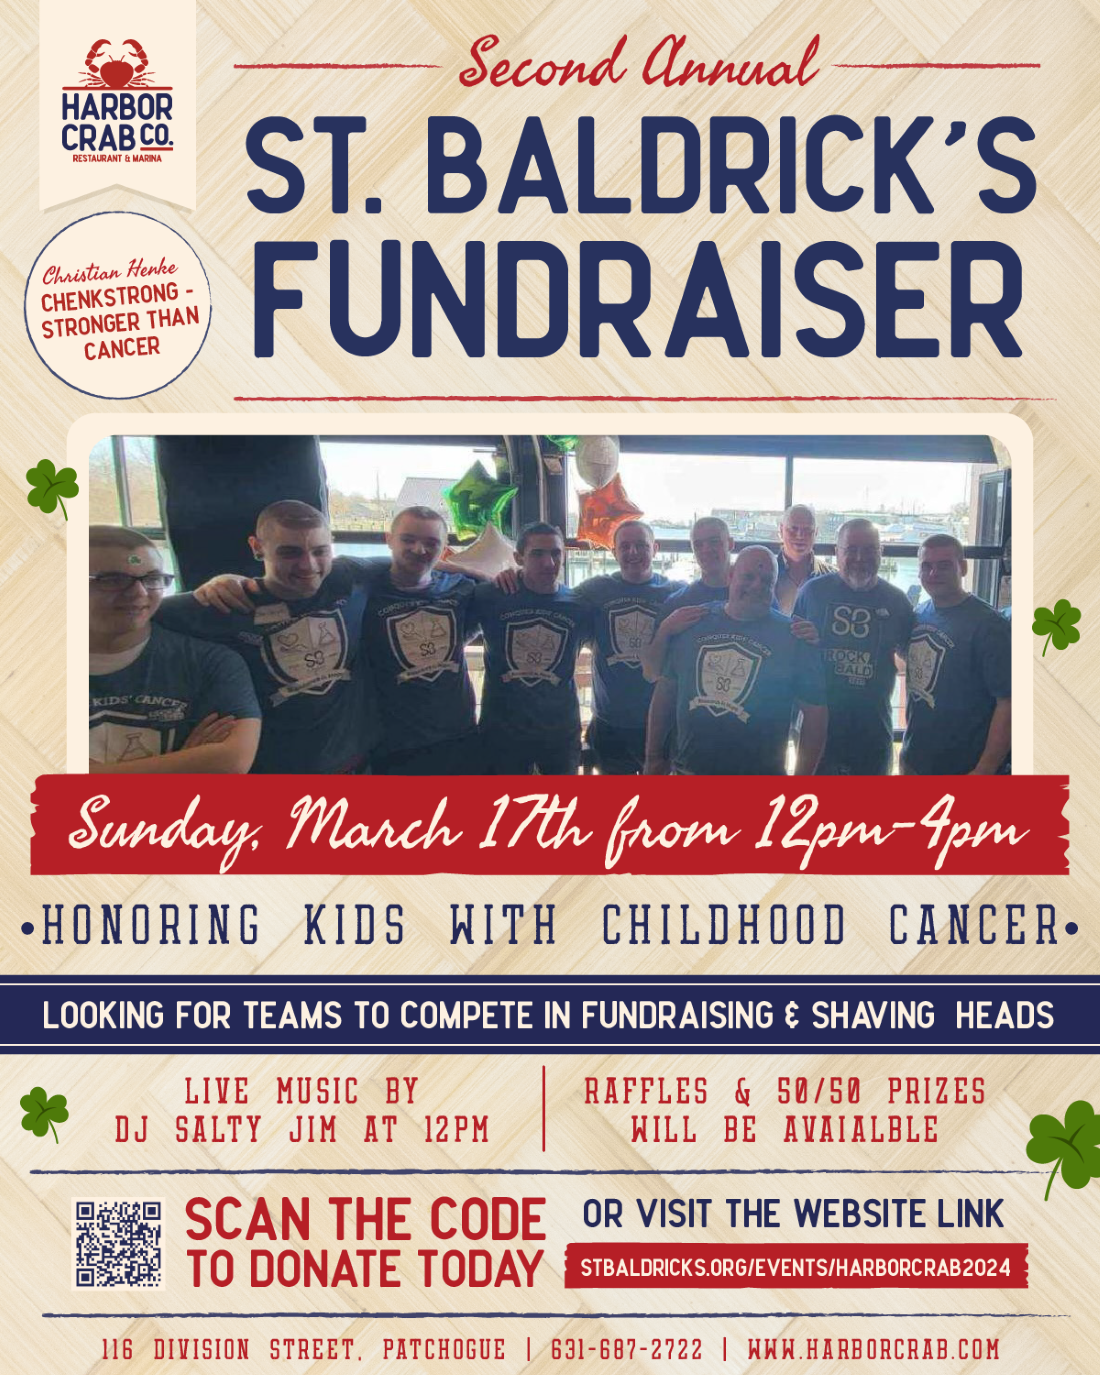 Second Annual St. Baldrick's Fundraiser at Harbor Crab Co., with a group photo of previous participants with shaved heads. The event is scheduled for Sunday, March 17th from 12 PM to 4 PM, honoring kids with childhood cancer. The poster features details like live music by DJ Salty Jim starting at 12 PM, availability of raffles and 50/50 prizes, and a call to action to scan a QR code or visit the website to donate. The address and contact information for Harbor Crab Co. are included at the bottom